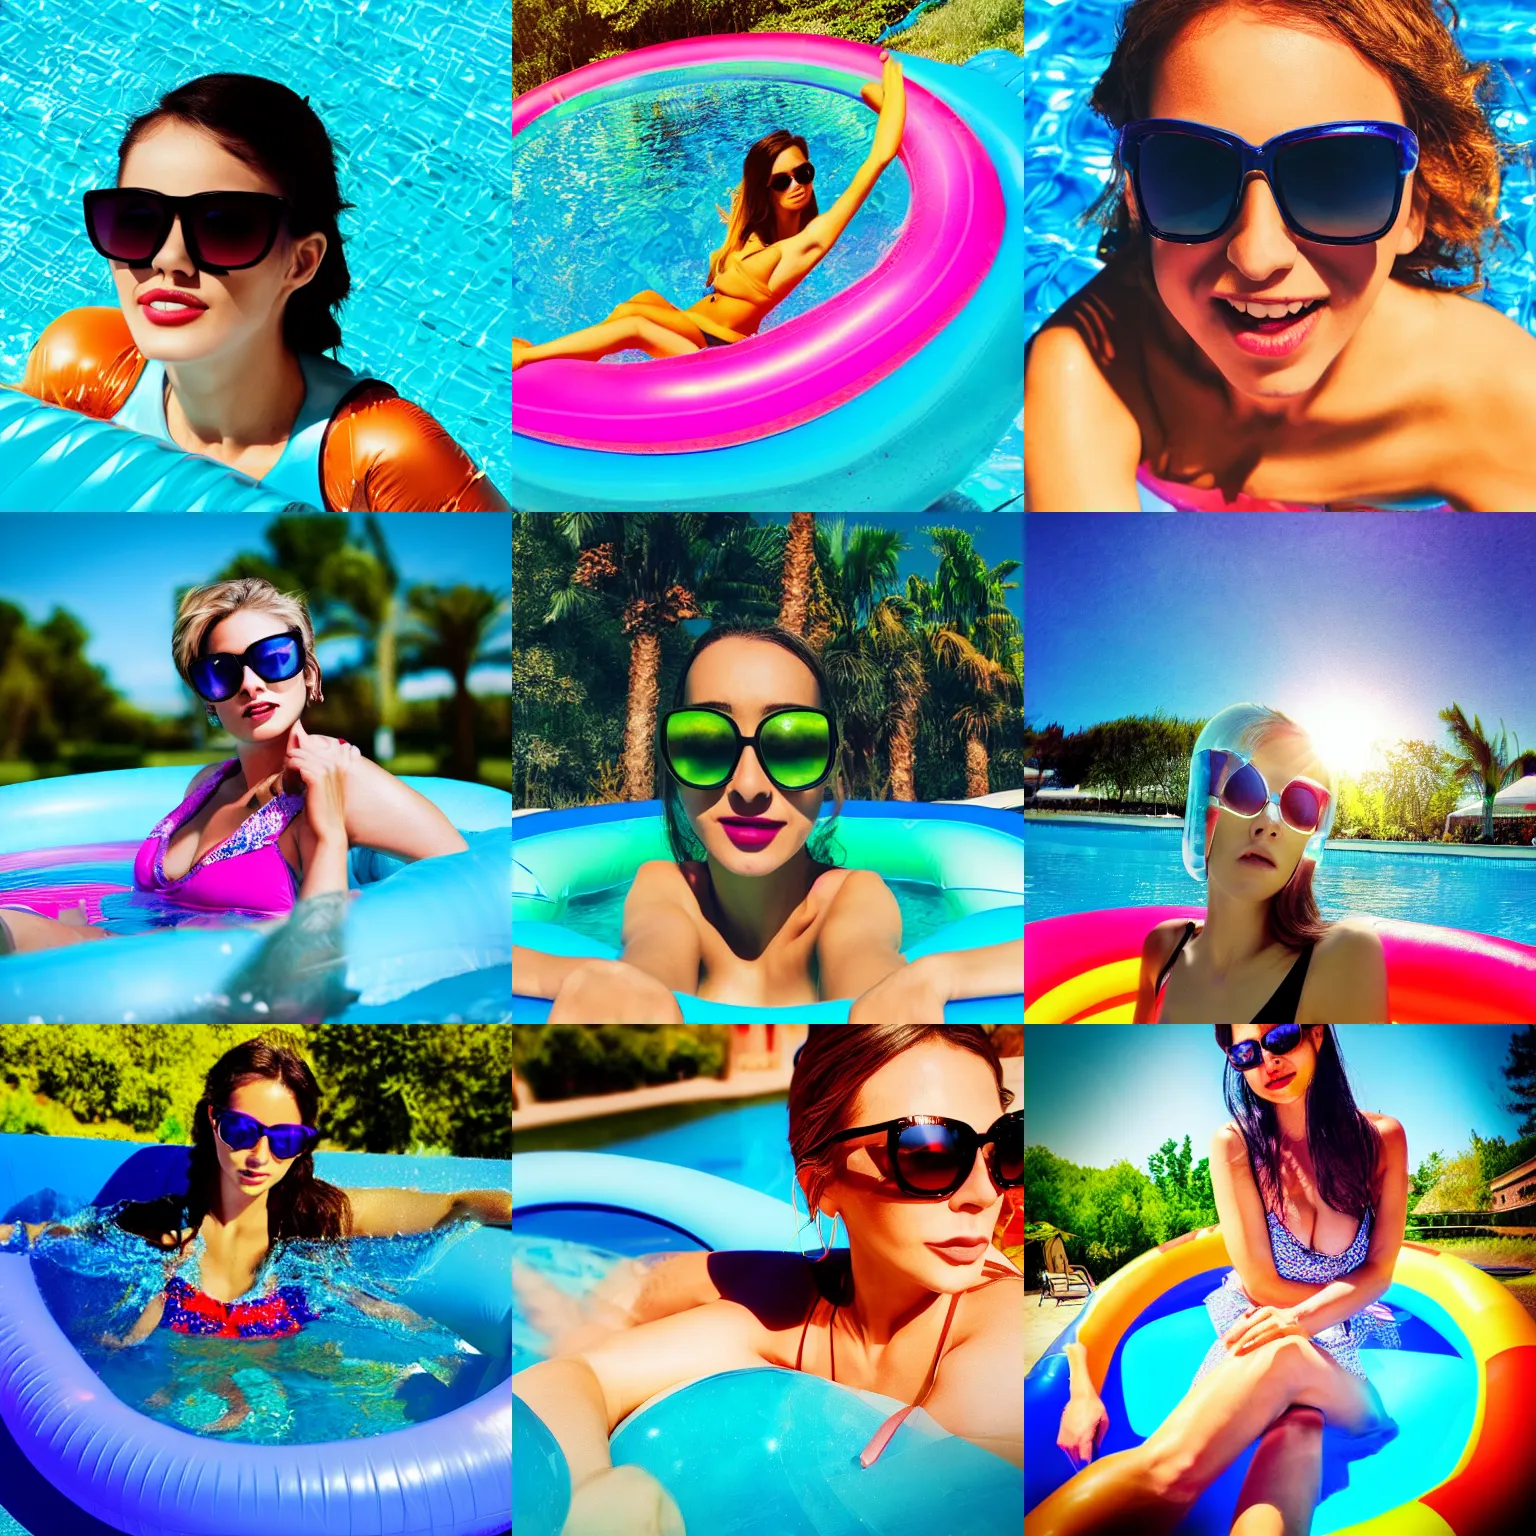 Prompt: HDR Iphone photo of an elegant woman with sunglasses in an inflatable pool, vivid colors, bokeh